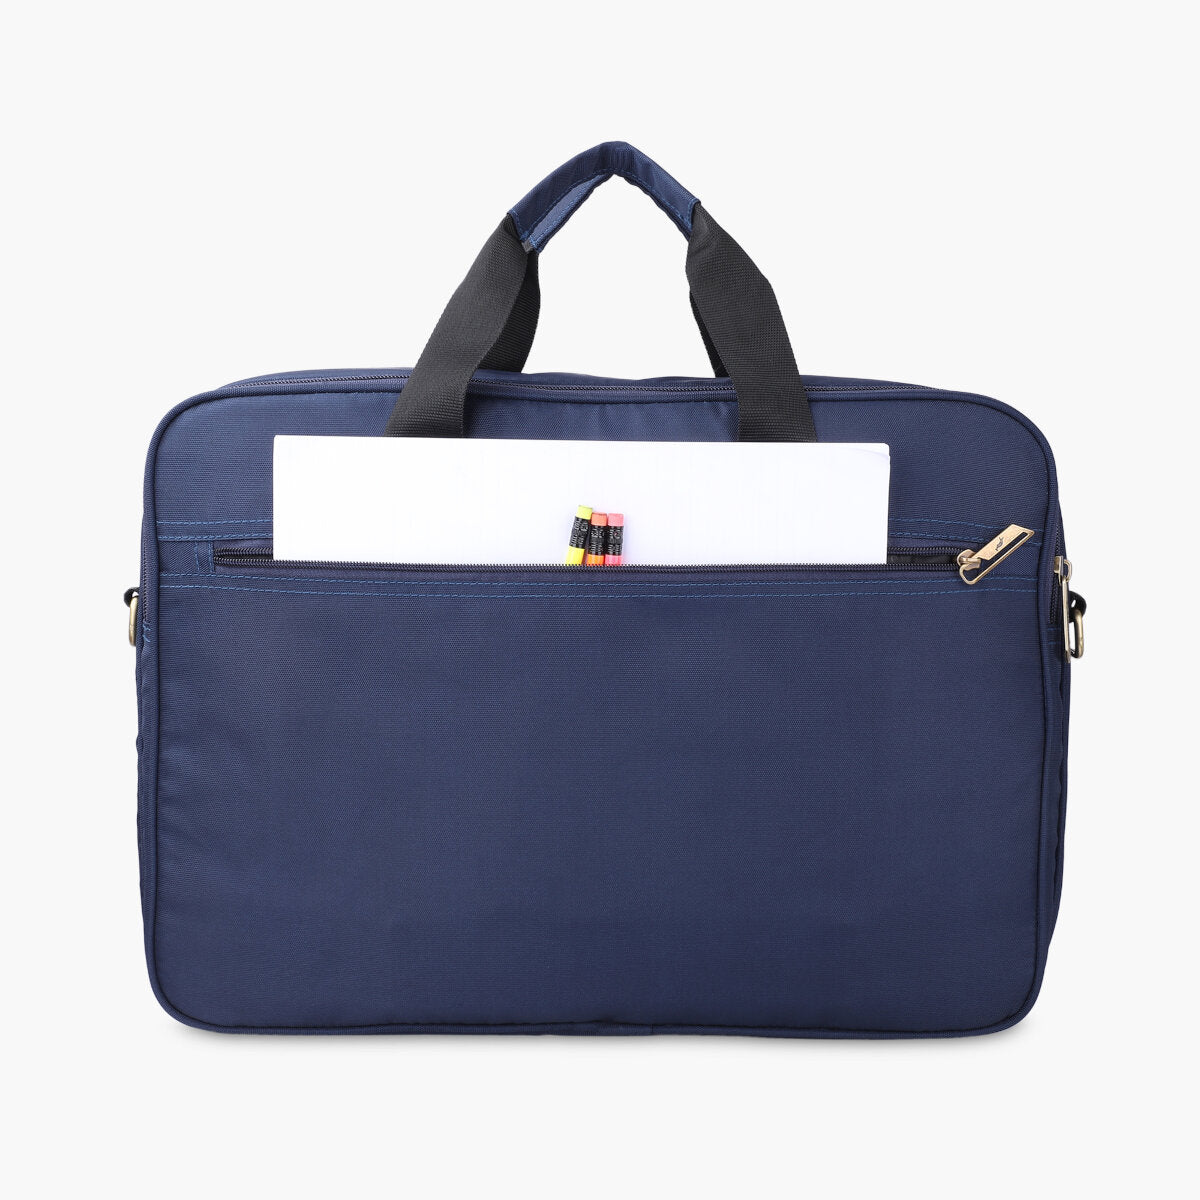 Navy-Blue, Protecta Staunch Ally Travel & Offfice Laptop Bag-4